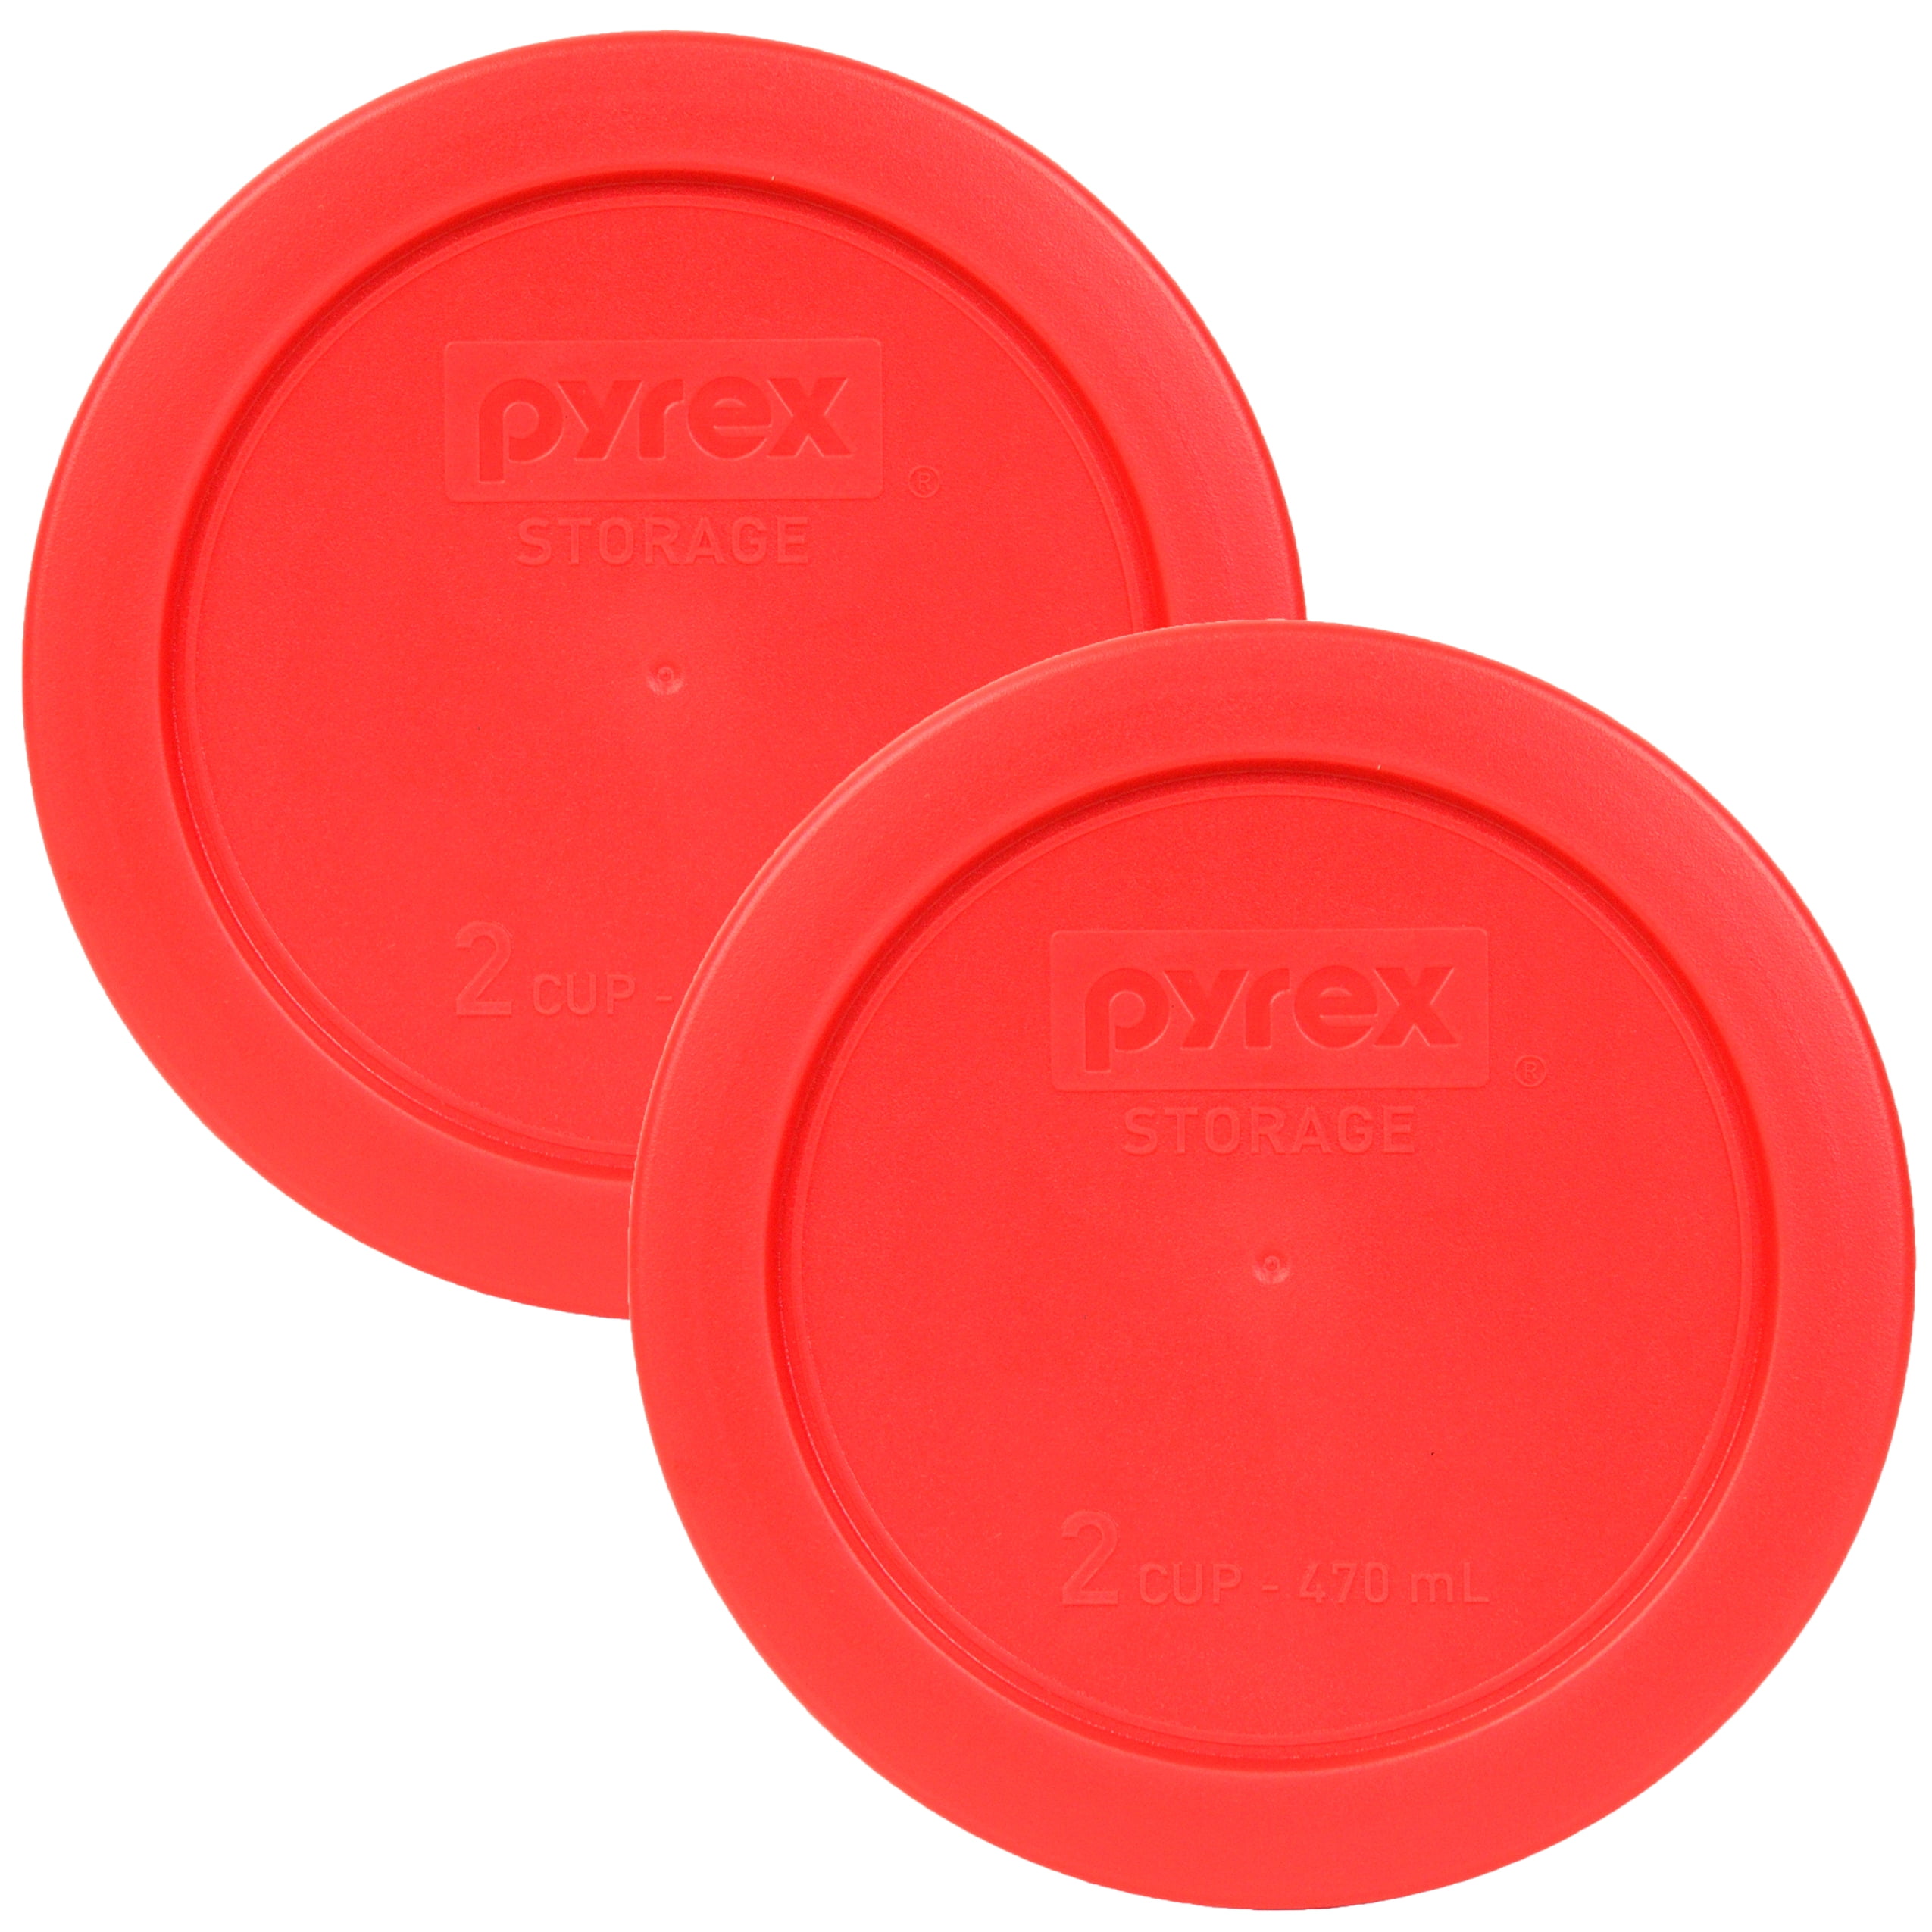 Modern (2021) glass and silicone lid for 2-cup Pyrex food storage: 7 ppm  Lead + 20 ppm Cadmium + 11 ppm Antimony.